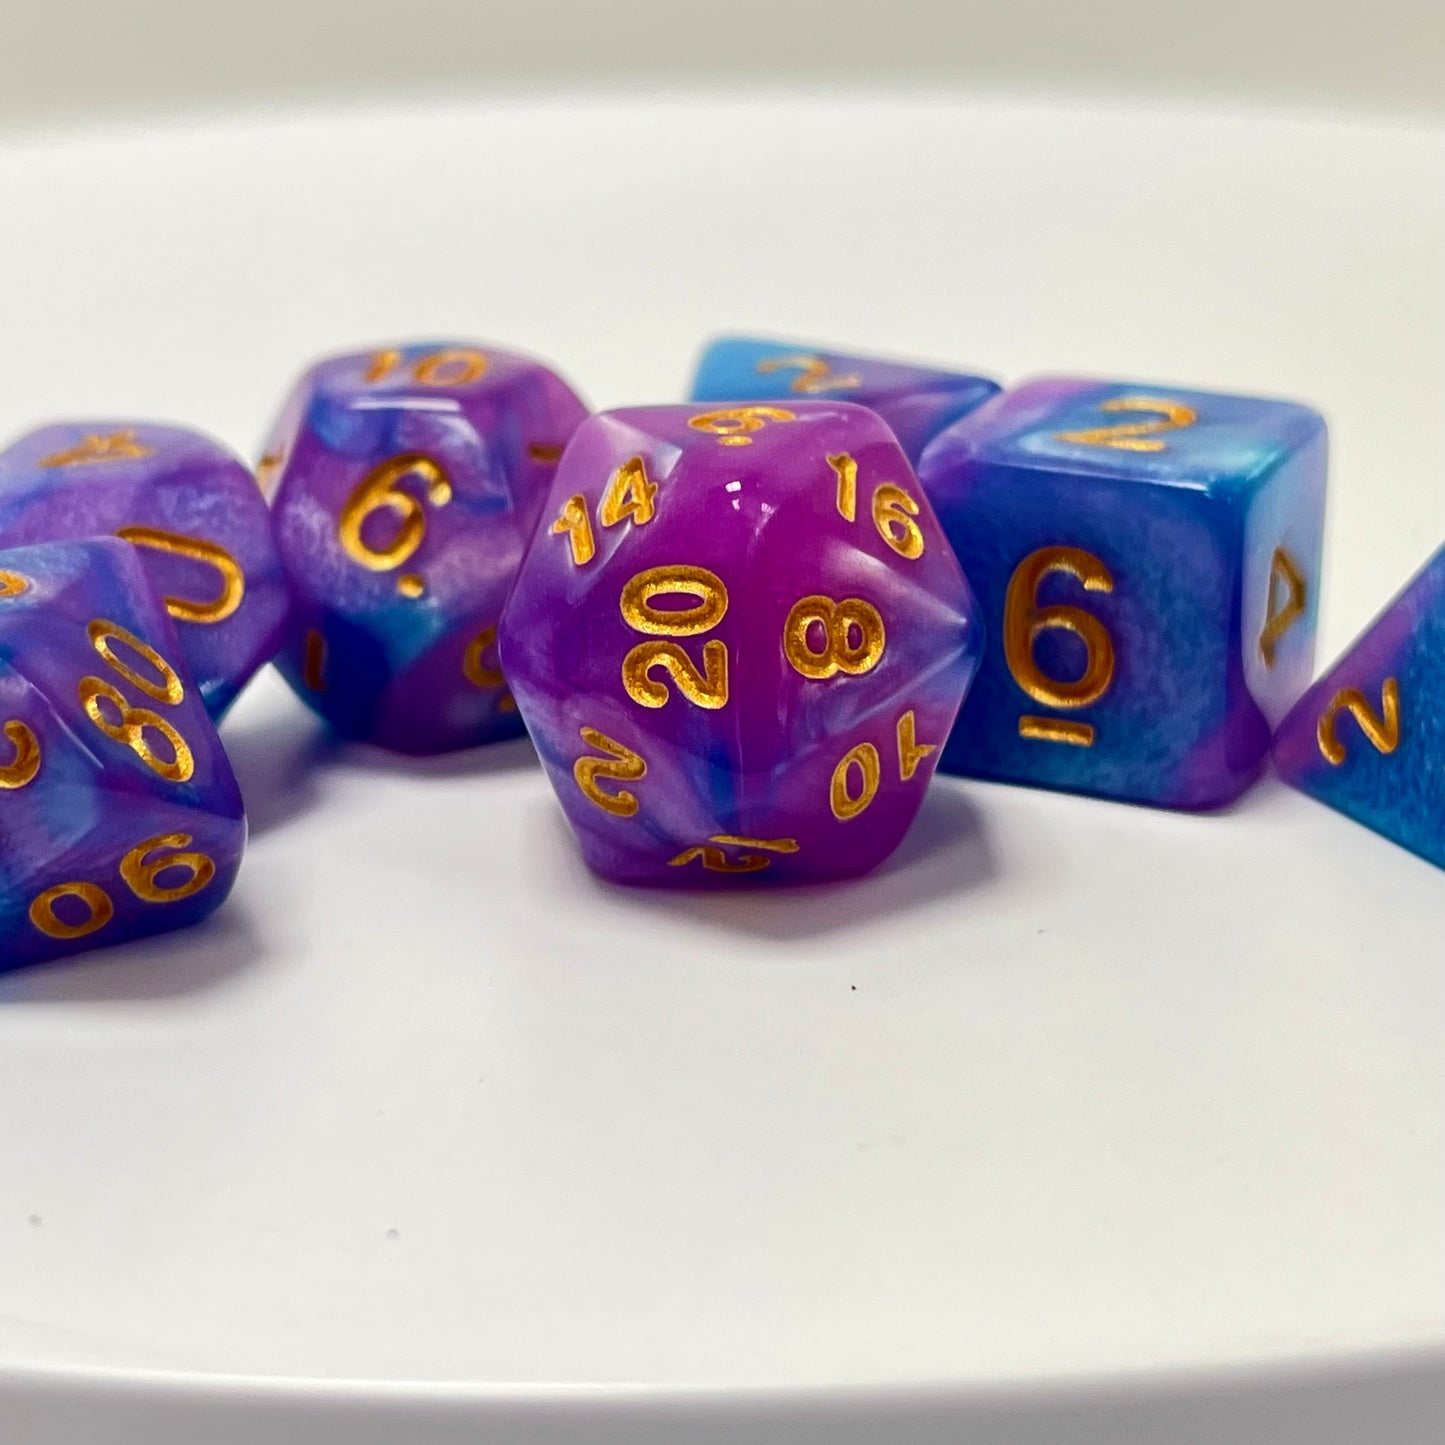 DND dice sets for TTRPG role playing games, dice goblin and dice dragon collectors